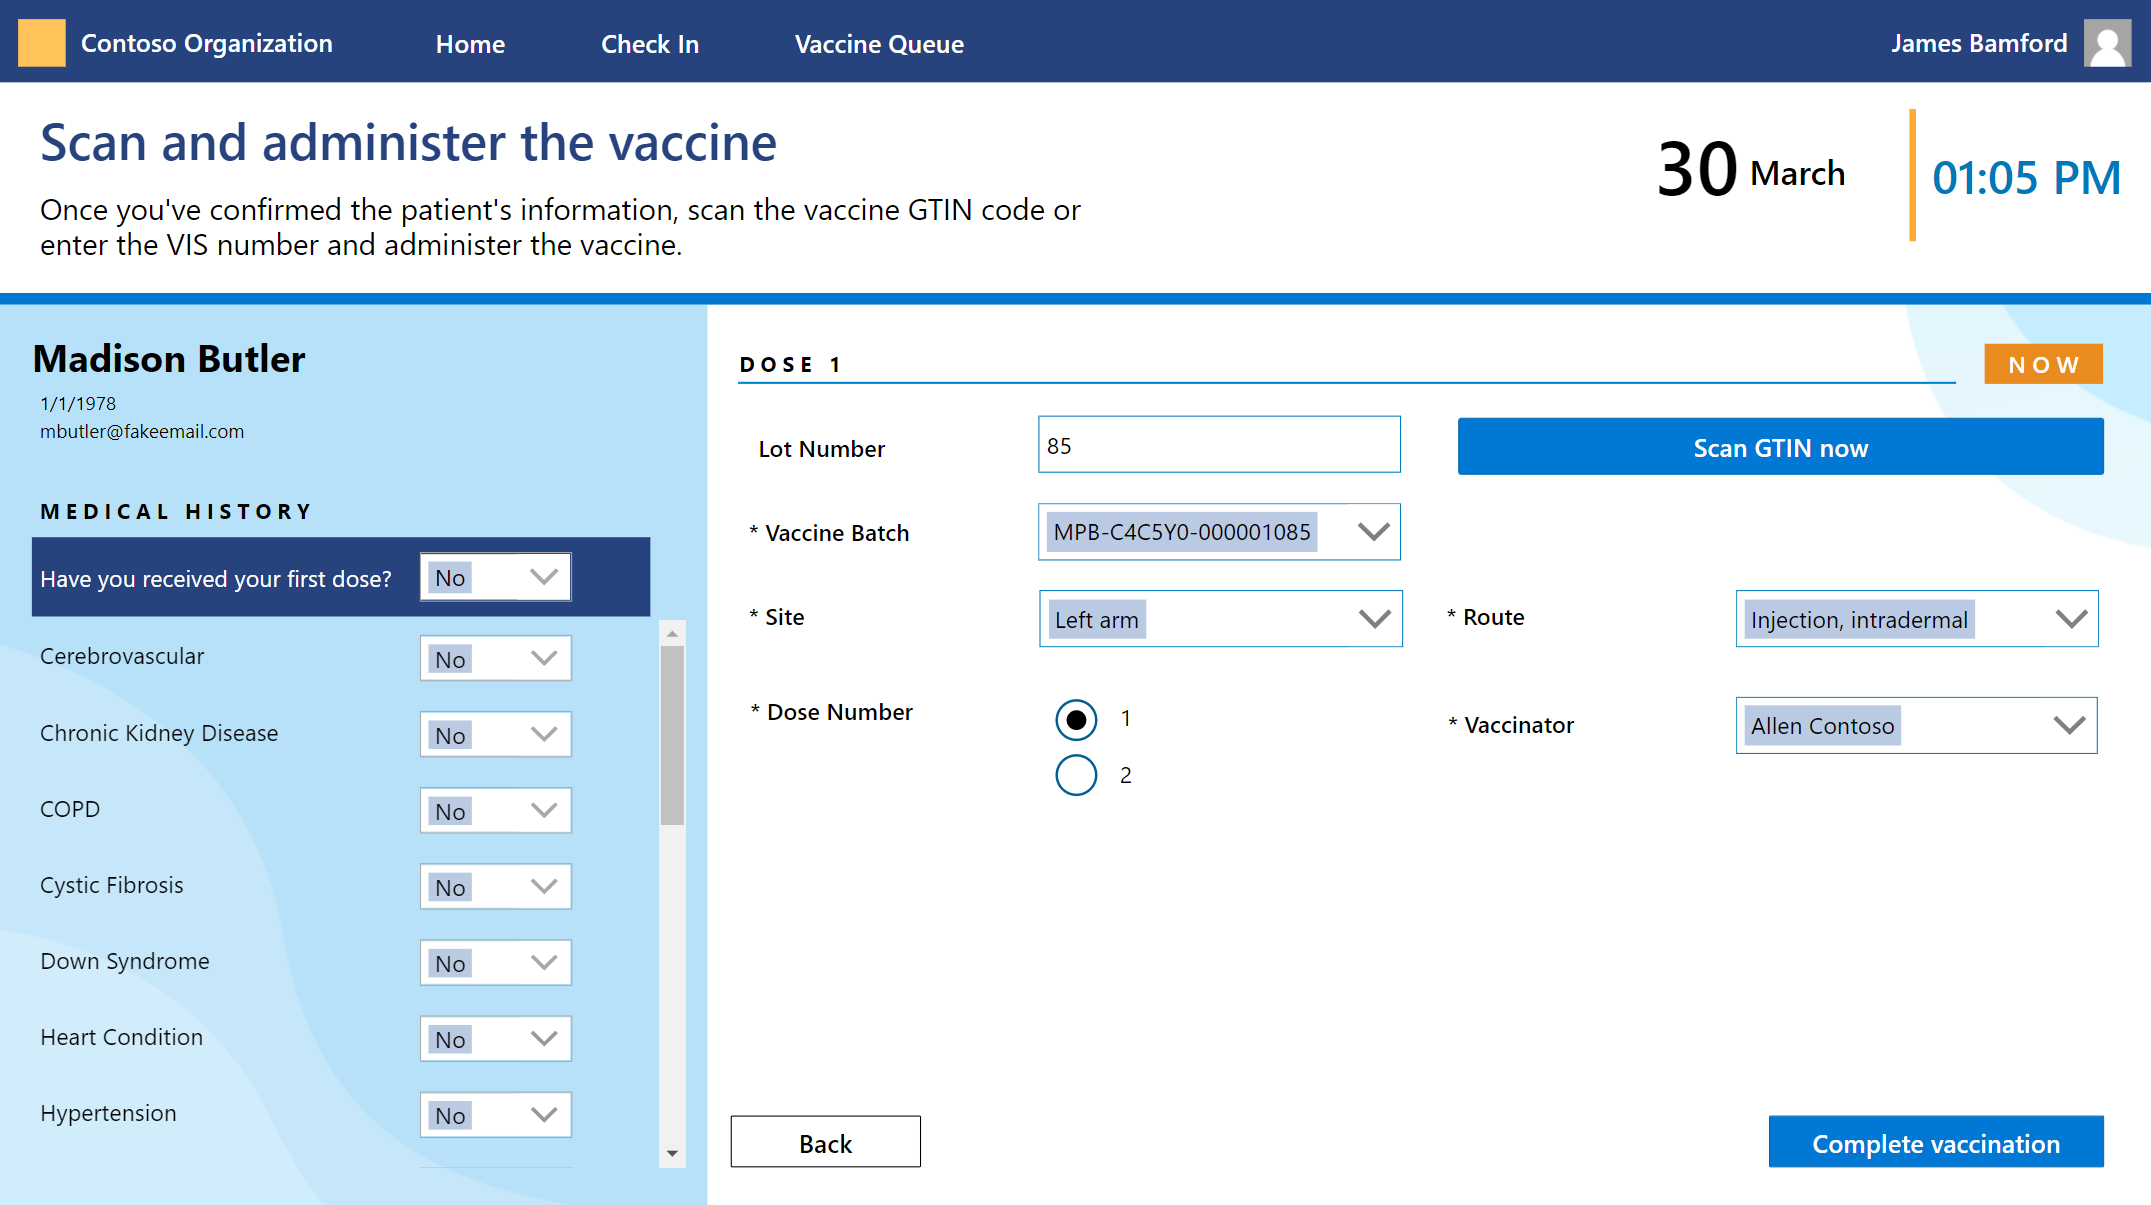 Screenshot of the Scan and administer the vaccine page with Site set to Left arm and Route set to Injection, intradermal.